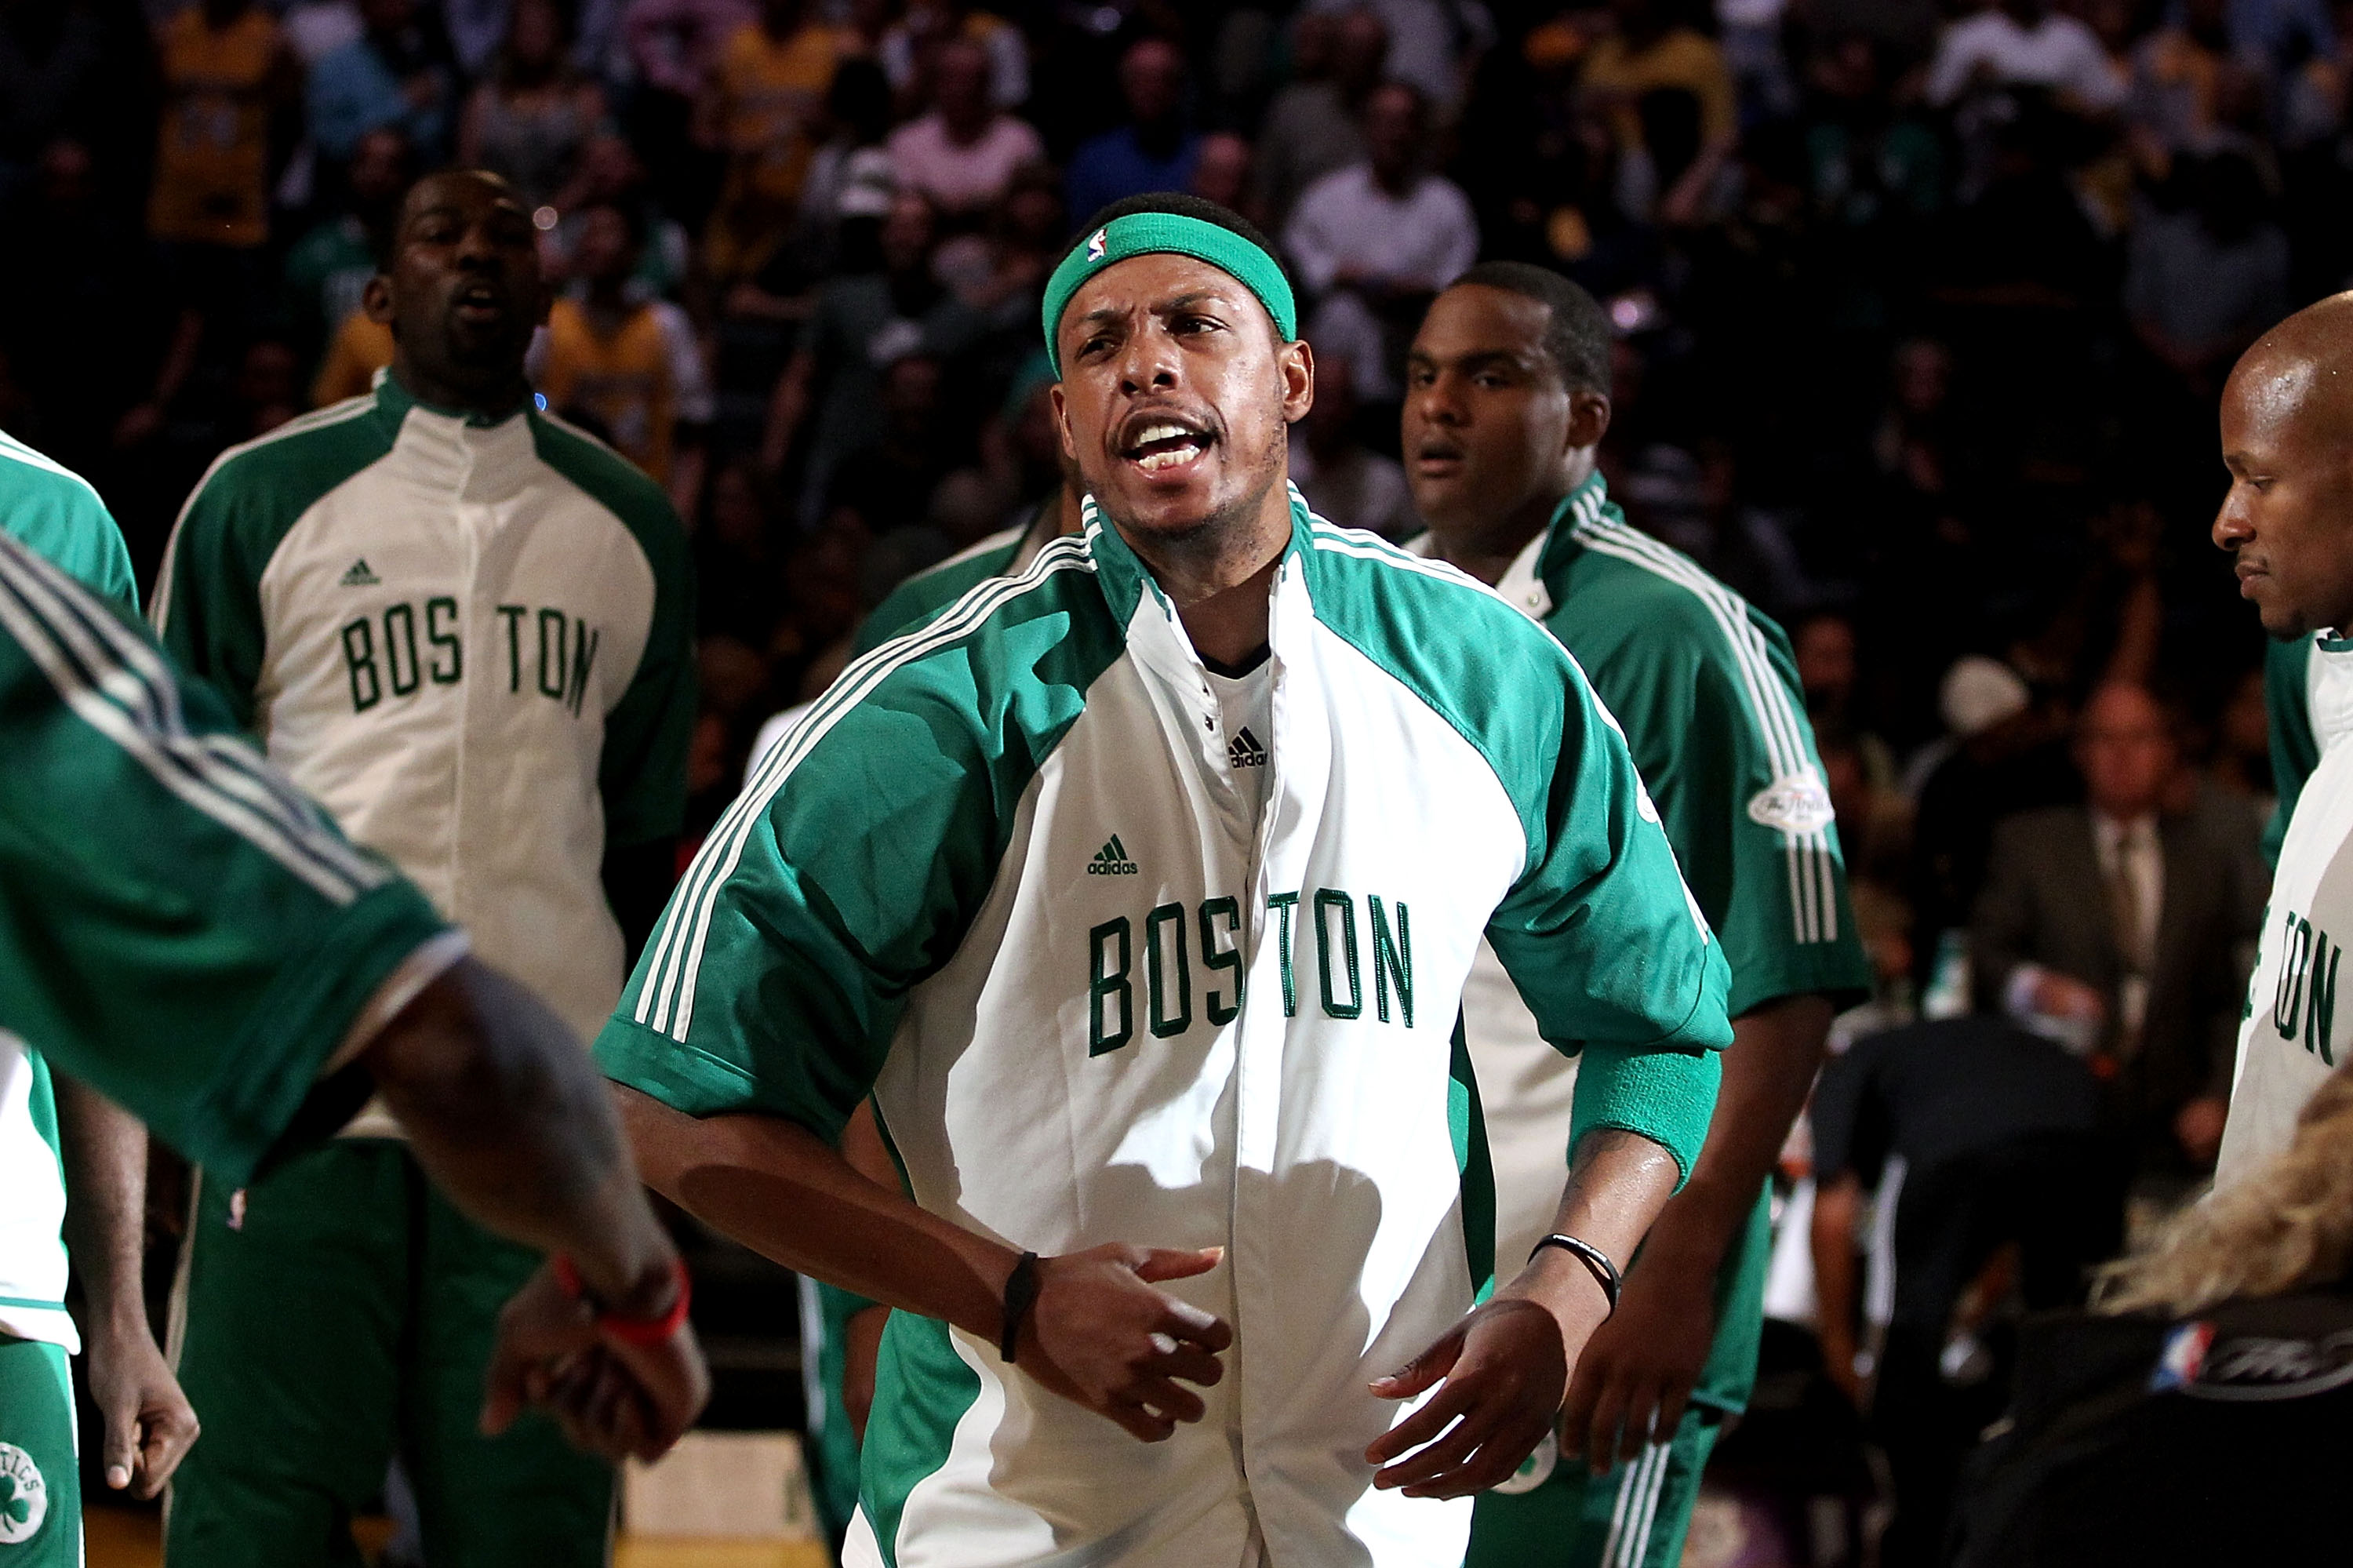 LOS ANGELES, CA - JUNE 15:  Paul Pierce #34 of the Boston Celtics is introduced before the game against the Los Angeles Lakers in Game Six of the 2010 NBA Finals at Staples Center on June 15, 2010 in Los Angeles, California.  NOTE TO USER: User expressly